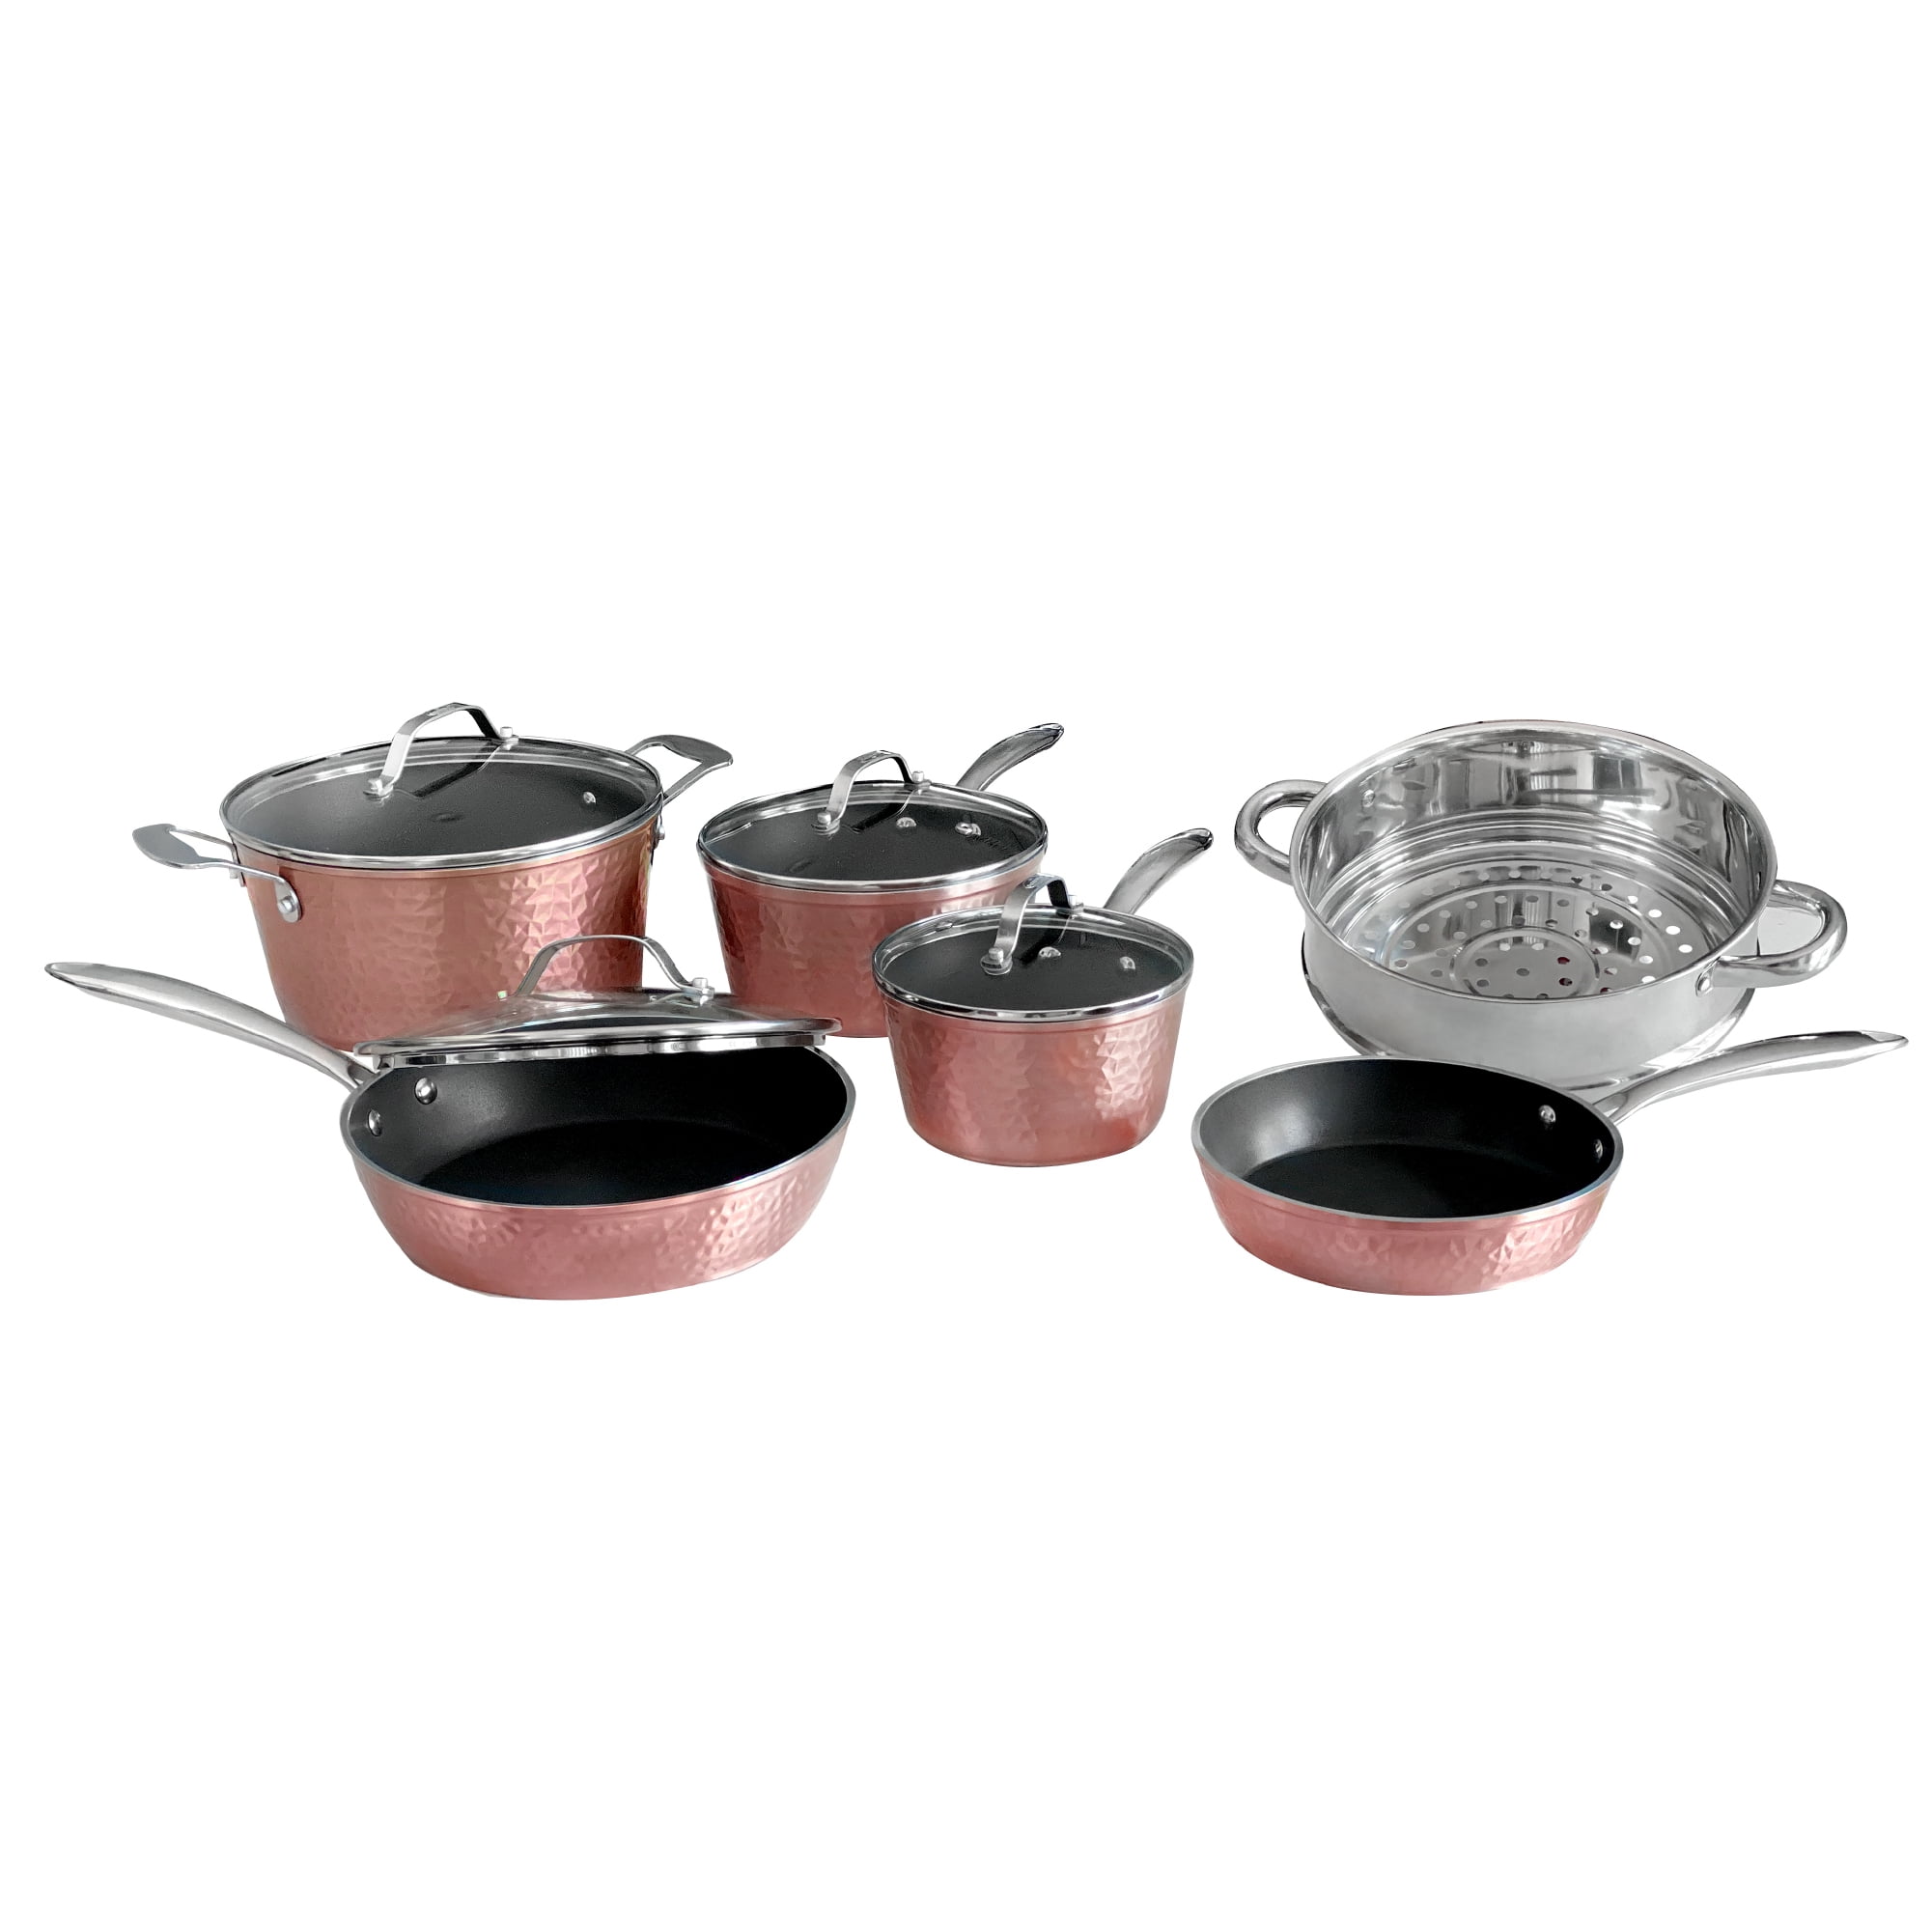 Hammered Rose Gold 5 Piece Set with Glass Lids – OrGreenic Cookware